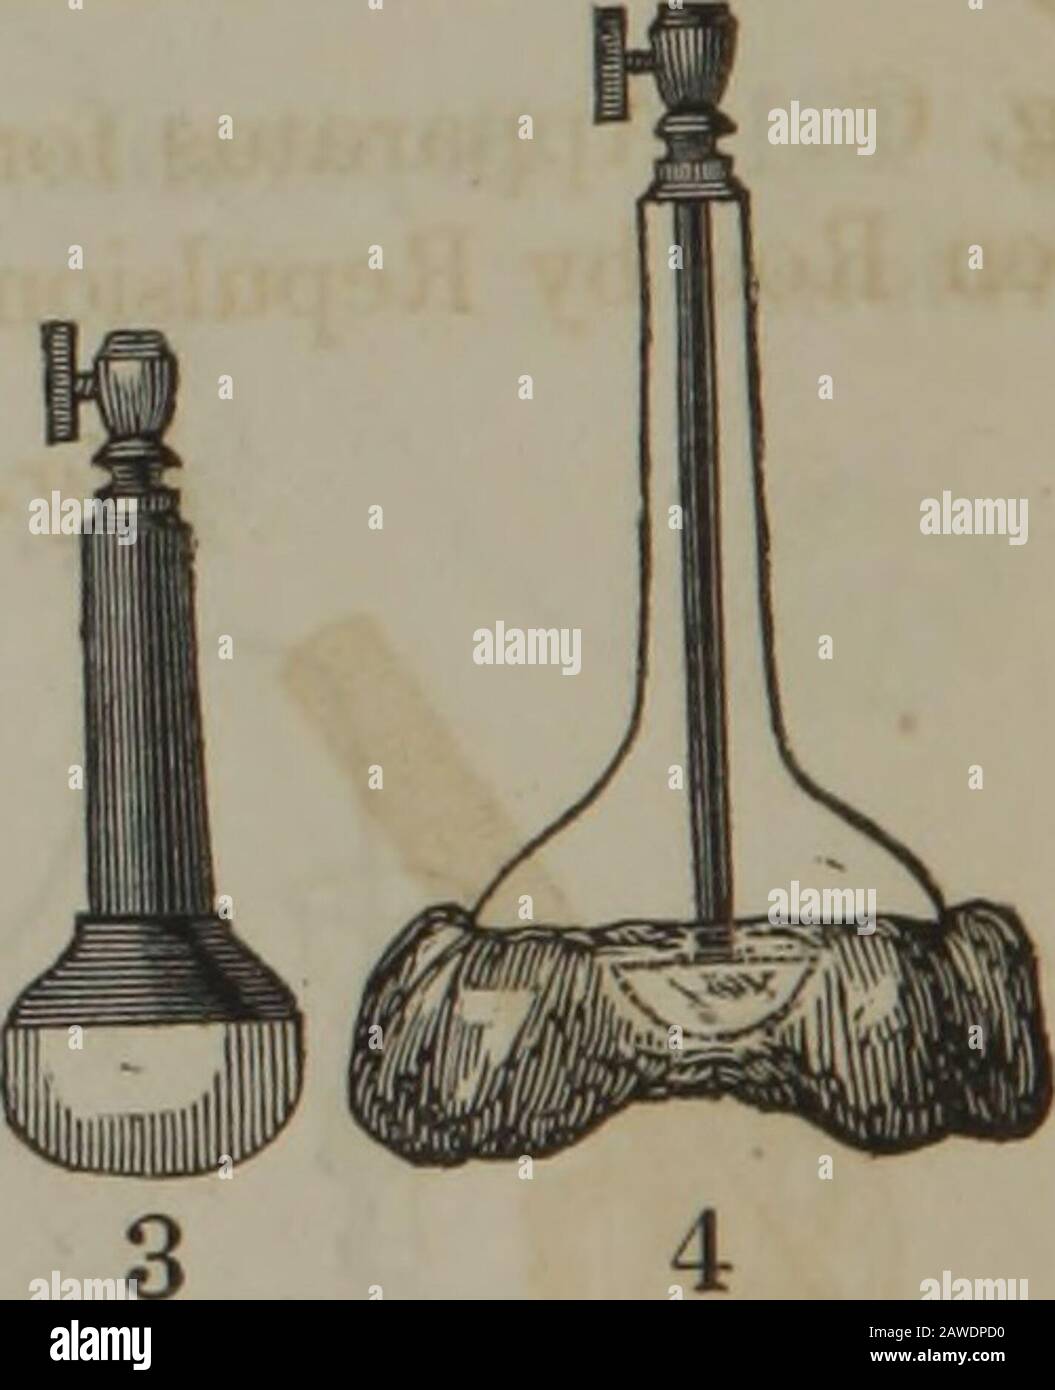 Catalogue of apparatus, to illustrate magnetism, galvanism, electrodynamics, electromagnetism, magno-electricity . Fig. 182. Double Helix and Vibrating Electro-tome, (with battery and handles.) Price $10. to 12.00. Fig. H.. 1.2.3.4. Handle, part wood, per pair. $2.00. Handle, German silver, per pair. $1.25. Medical Handle, silver plated, per pair. $2.00.Sponge Handle, large, single. $1.00. do. do. small&gt; do. 75 cts. OF APPARATUS. 39 &g. I. Stock Photo